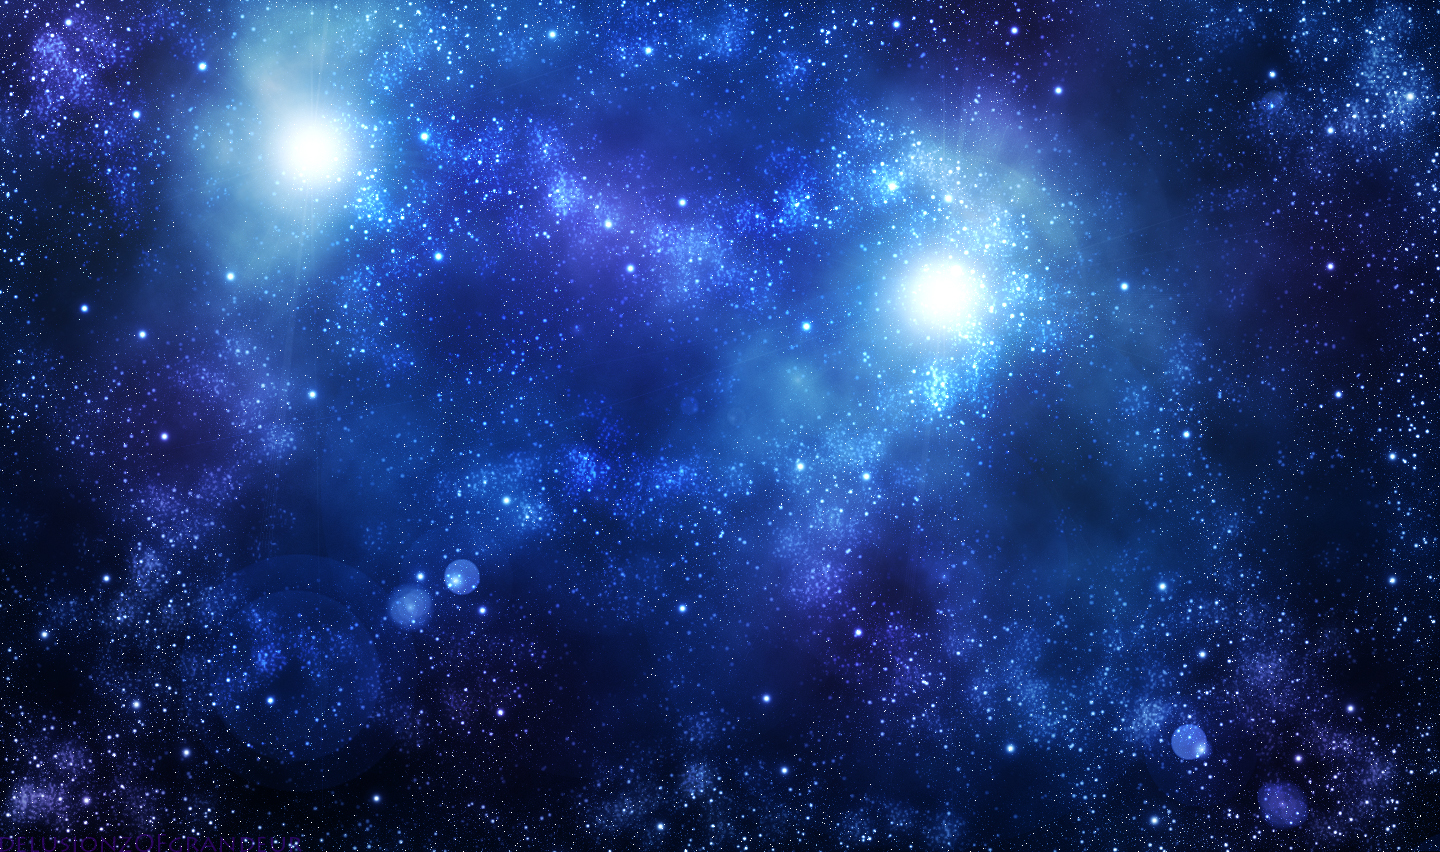 Galaxy Background Images, HD Pictures and Wallpaper For Free Download